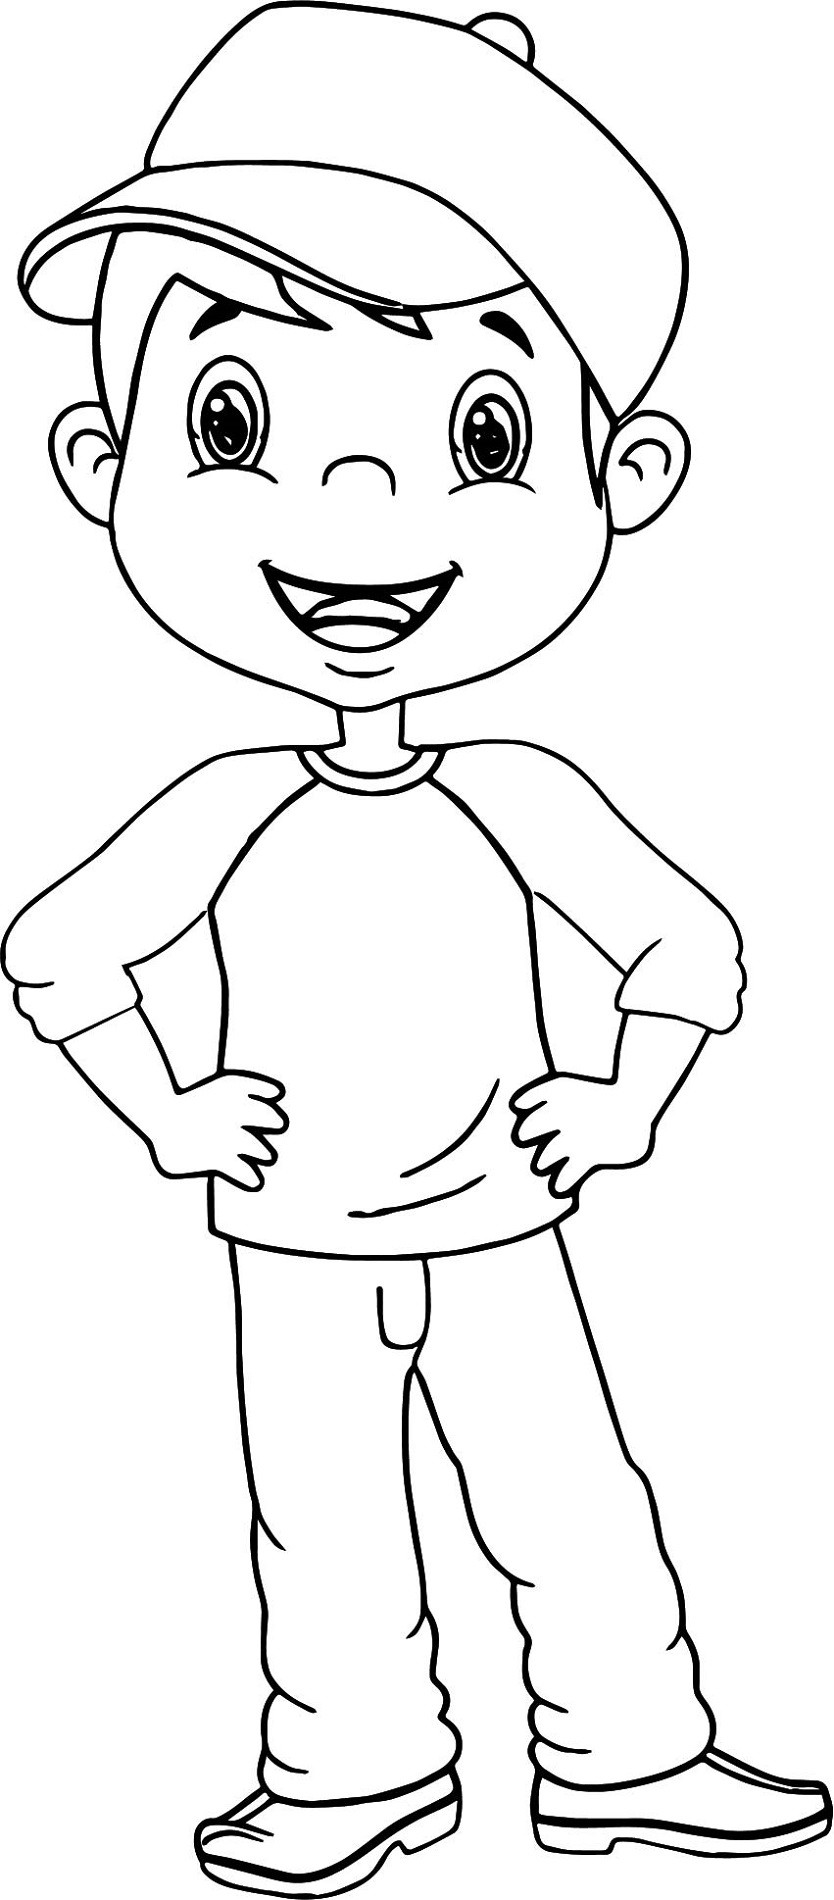 Coloring Book For Boys
 Cartoon Coloring Pages Boys – Learning Printable